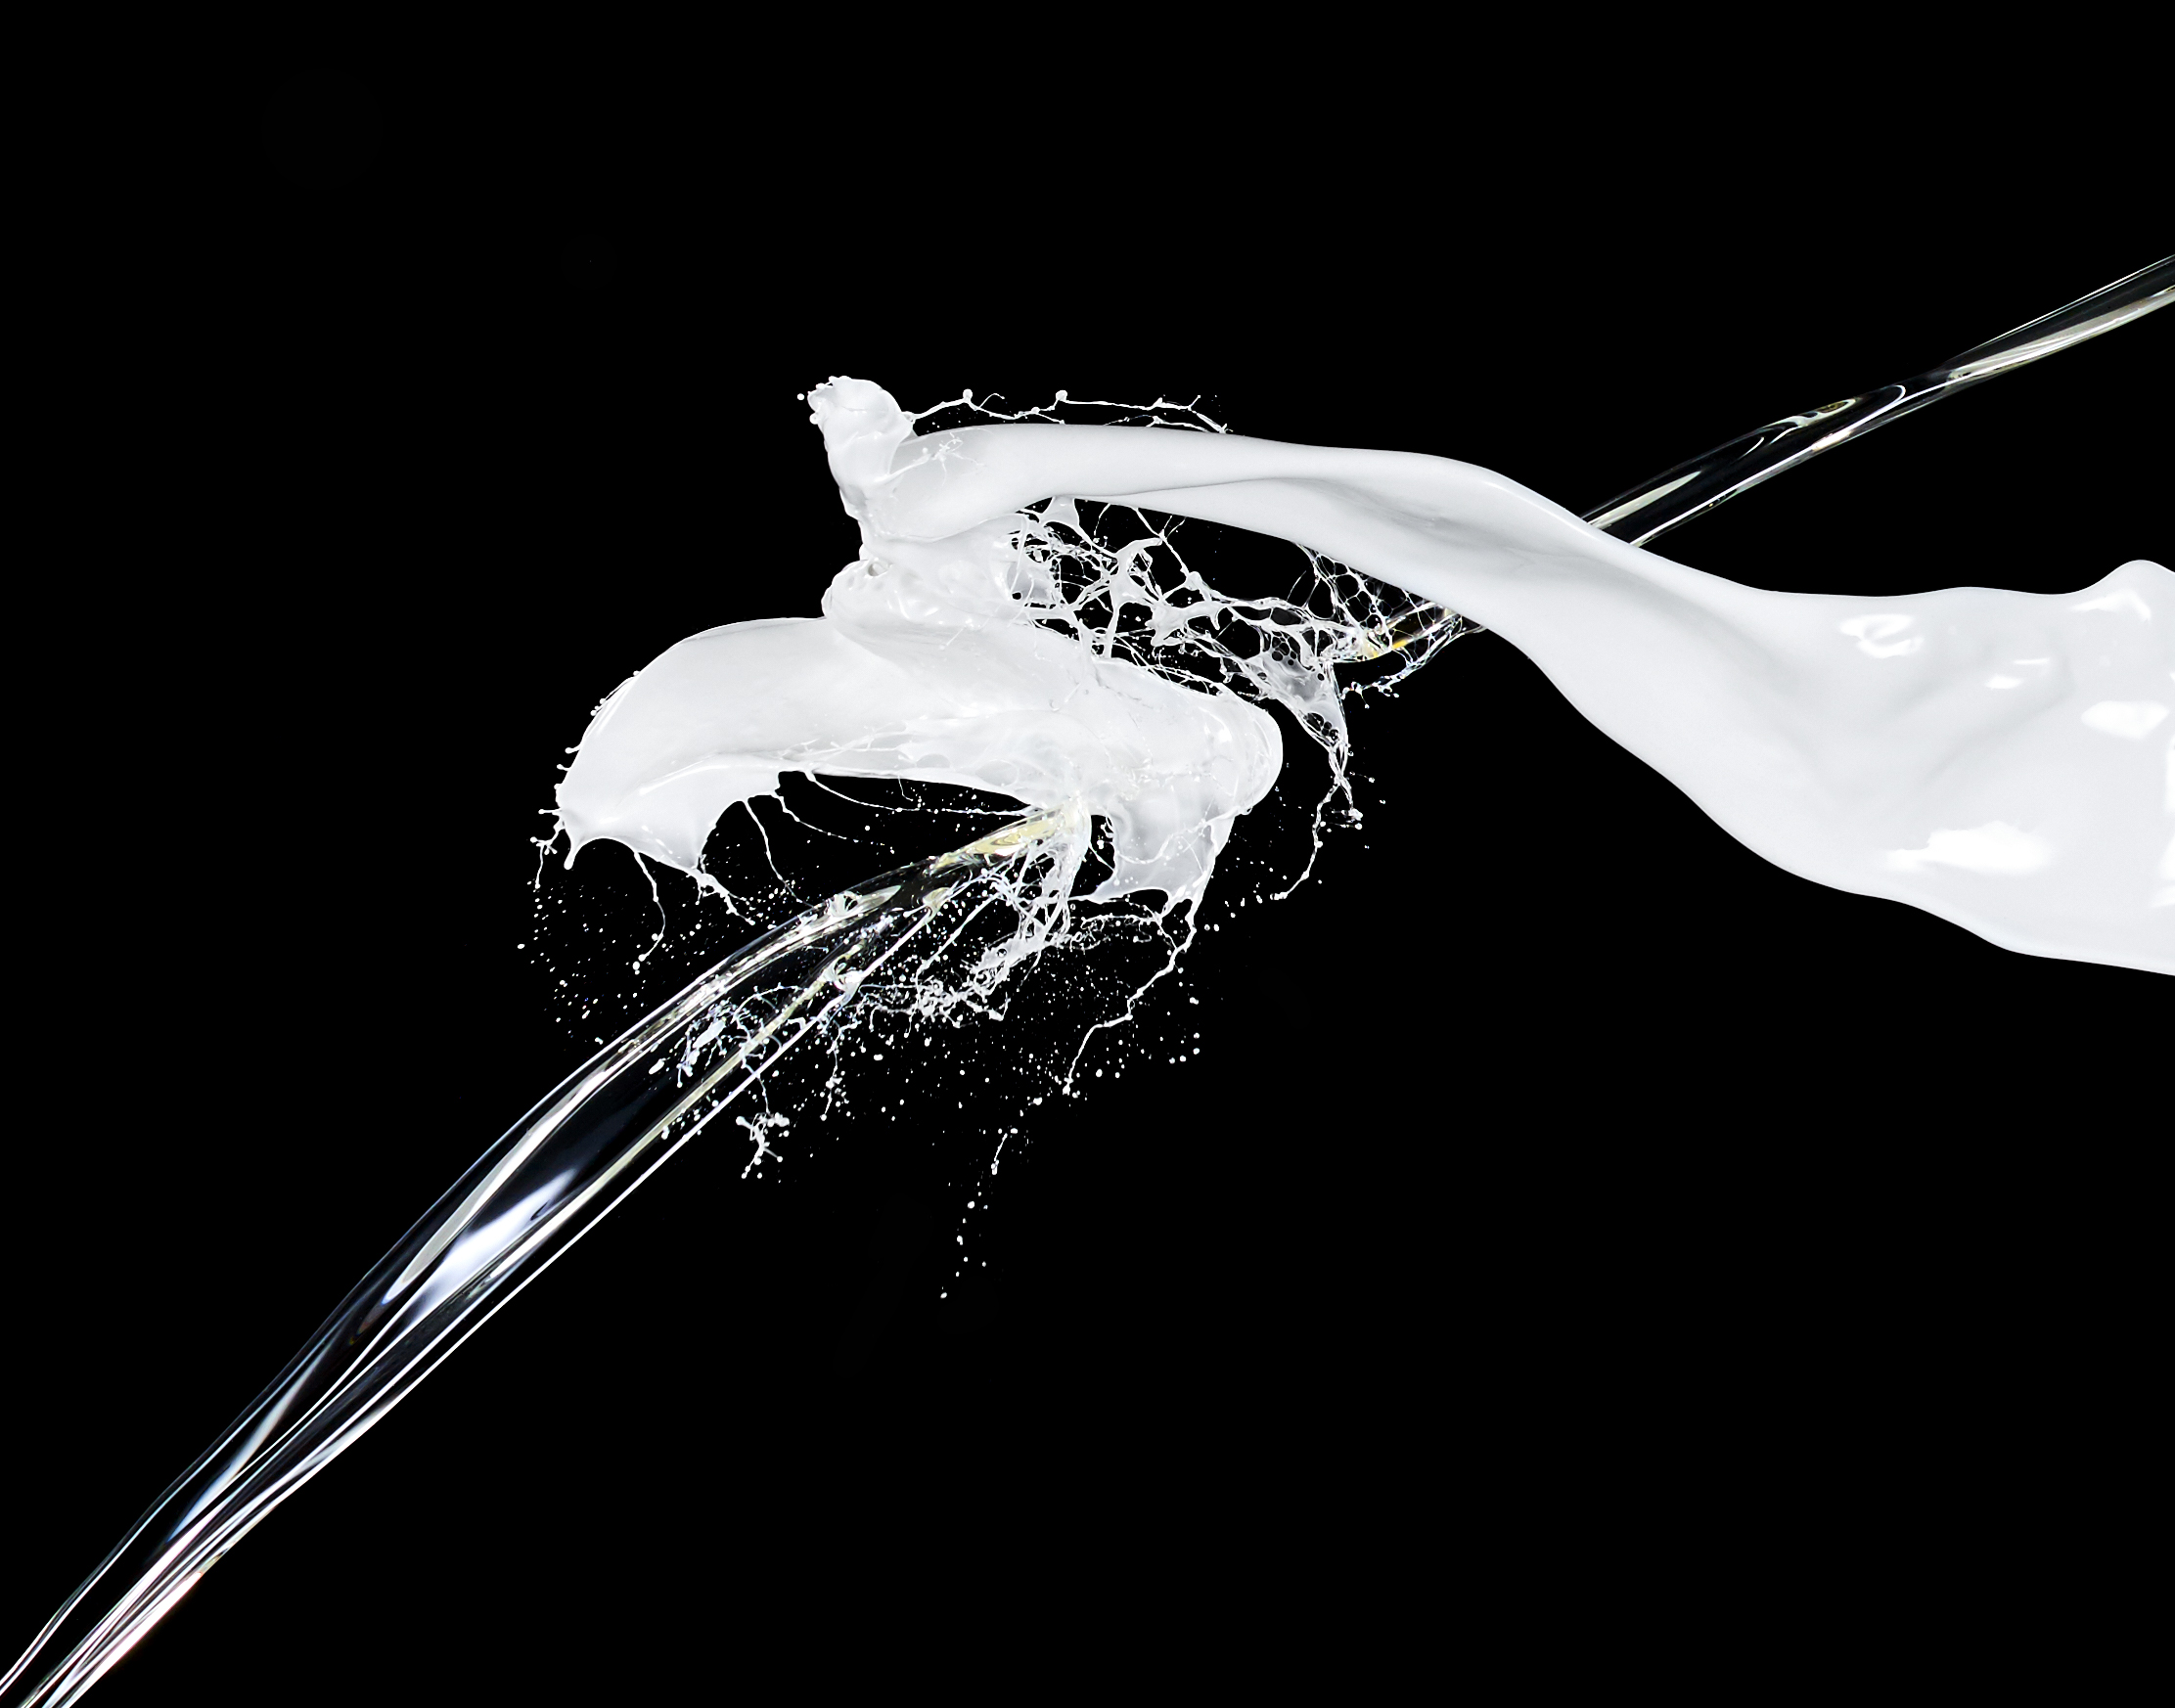 PROPRIETARY CLEAR LIQUID SHOT IN MID AIR WHILE CRASHING THOUGH WHITE PAINT CREATING ABSTRACT SHAPES SHOT BY DAVID FILIBERTI